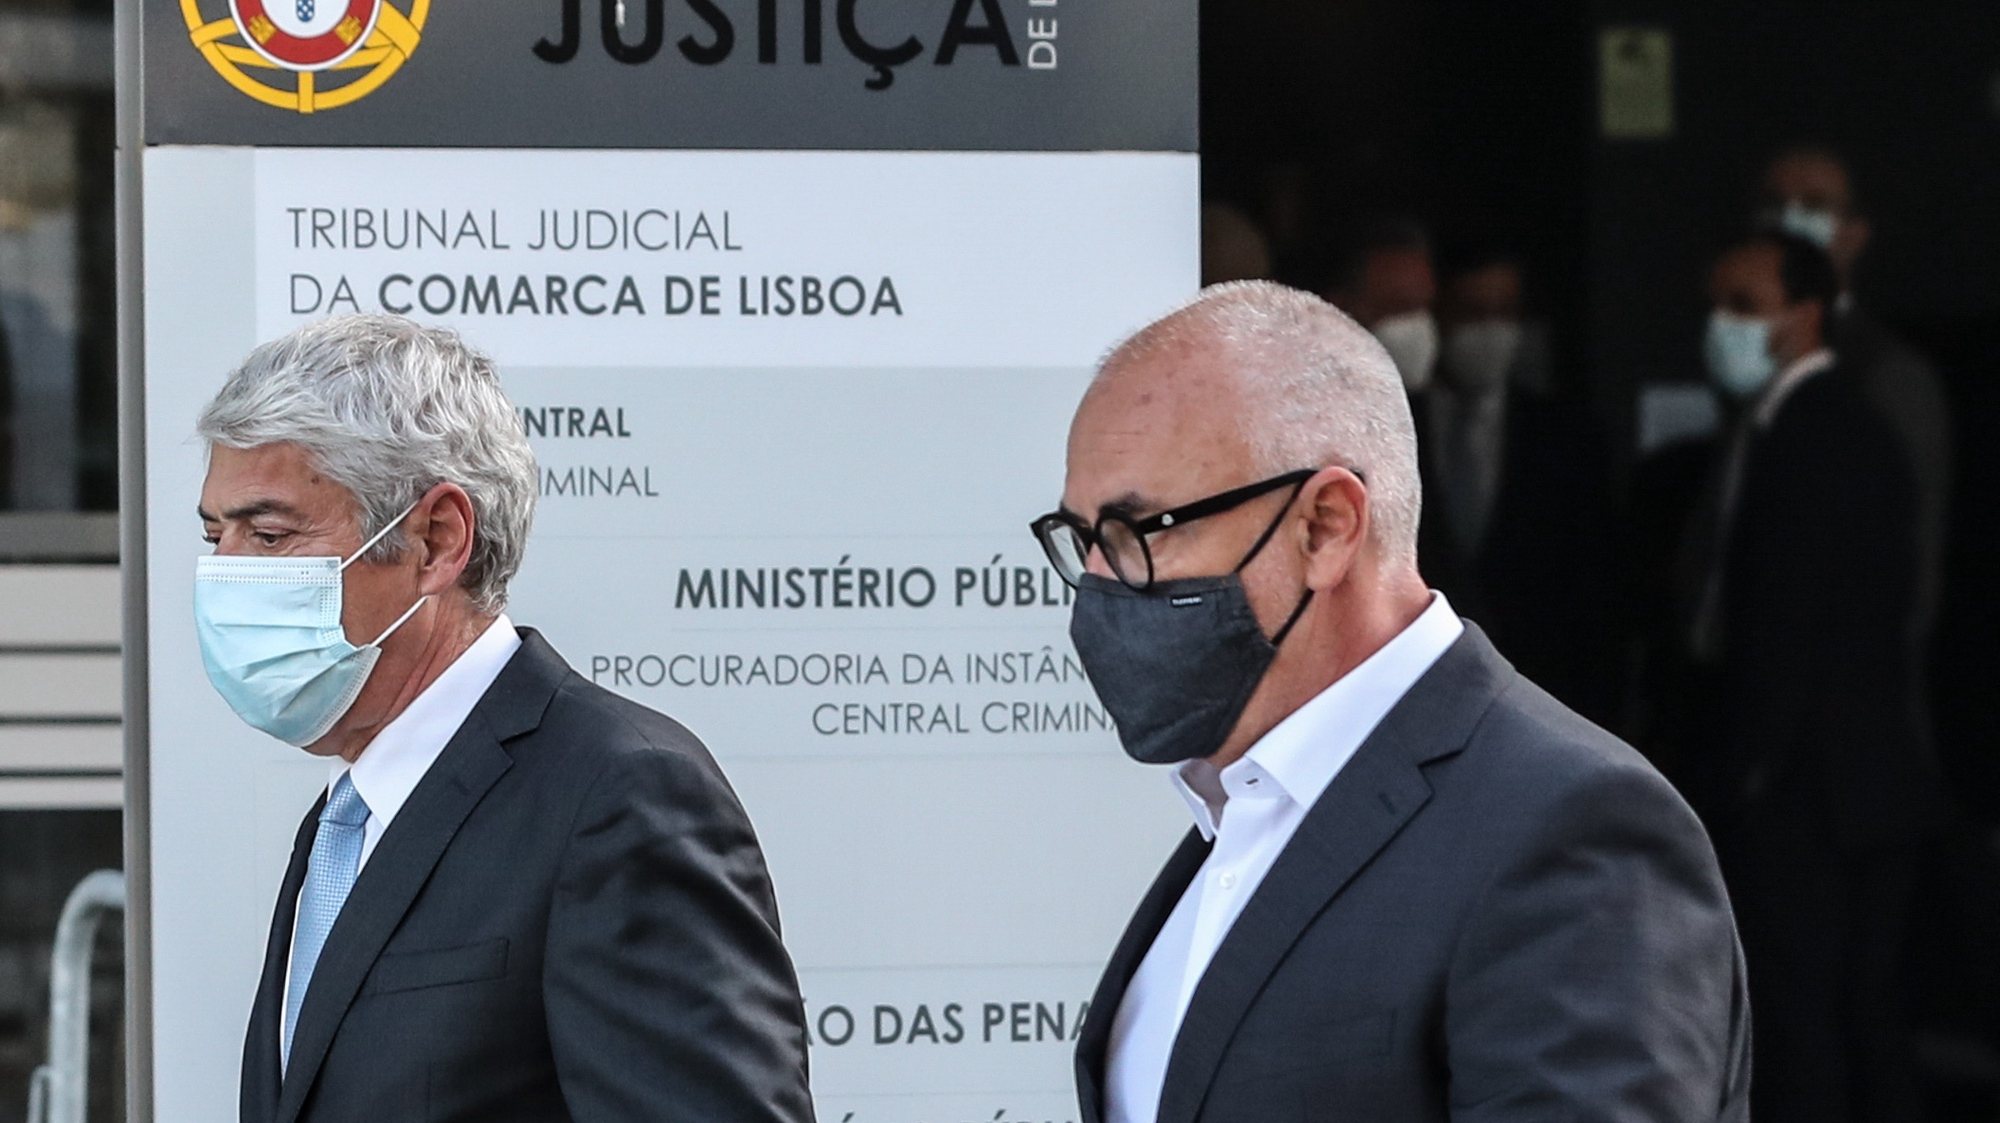 epa09125086 The defendant and former Prime Minister Jose Socrates (L) and his lawyer Pedro Delille (R) leave the court after the reading of the instructional decision of the high-profile corruption case known as Operation Marques, at the Justice Campus in Lisbon, Portugal, 09 April 2021. Operation Marques has 28 defendants - 19 people and 9 companies - including former Prime Minister Jose Socrates, banker Ricardo Salgado, businessman and friend of Socrates Carlos Santos Silva, and senior executives of Portugal Telecom, and is related to crimes of active and passive corruption, money laundering, document forgery, and tax fraud.  EPA/ANTONIO COTRIM